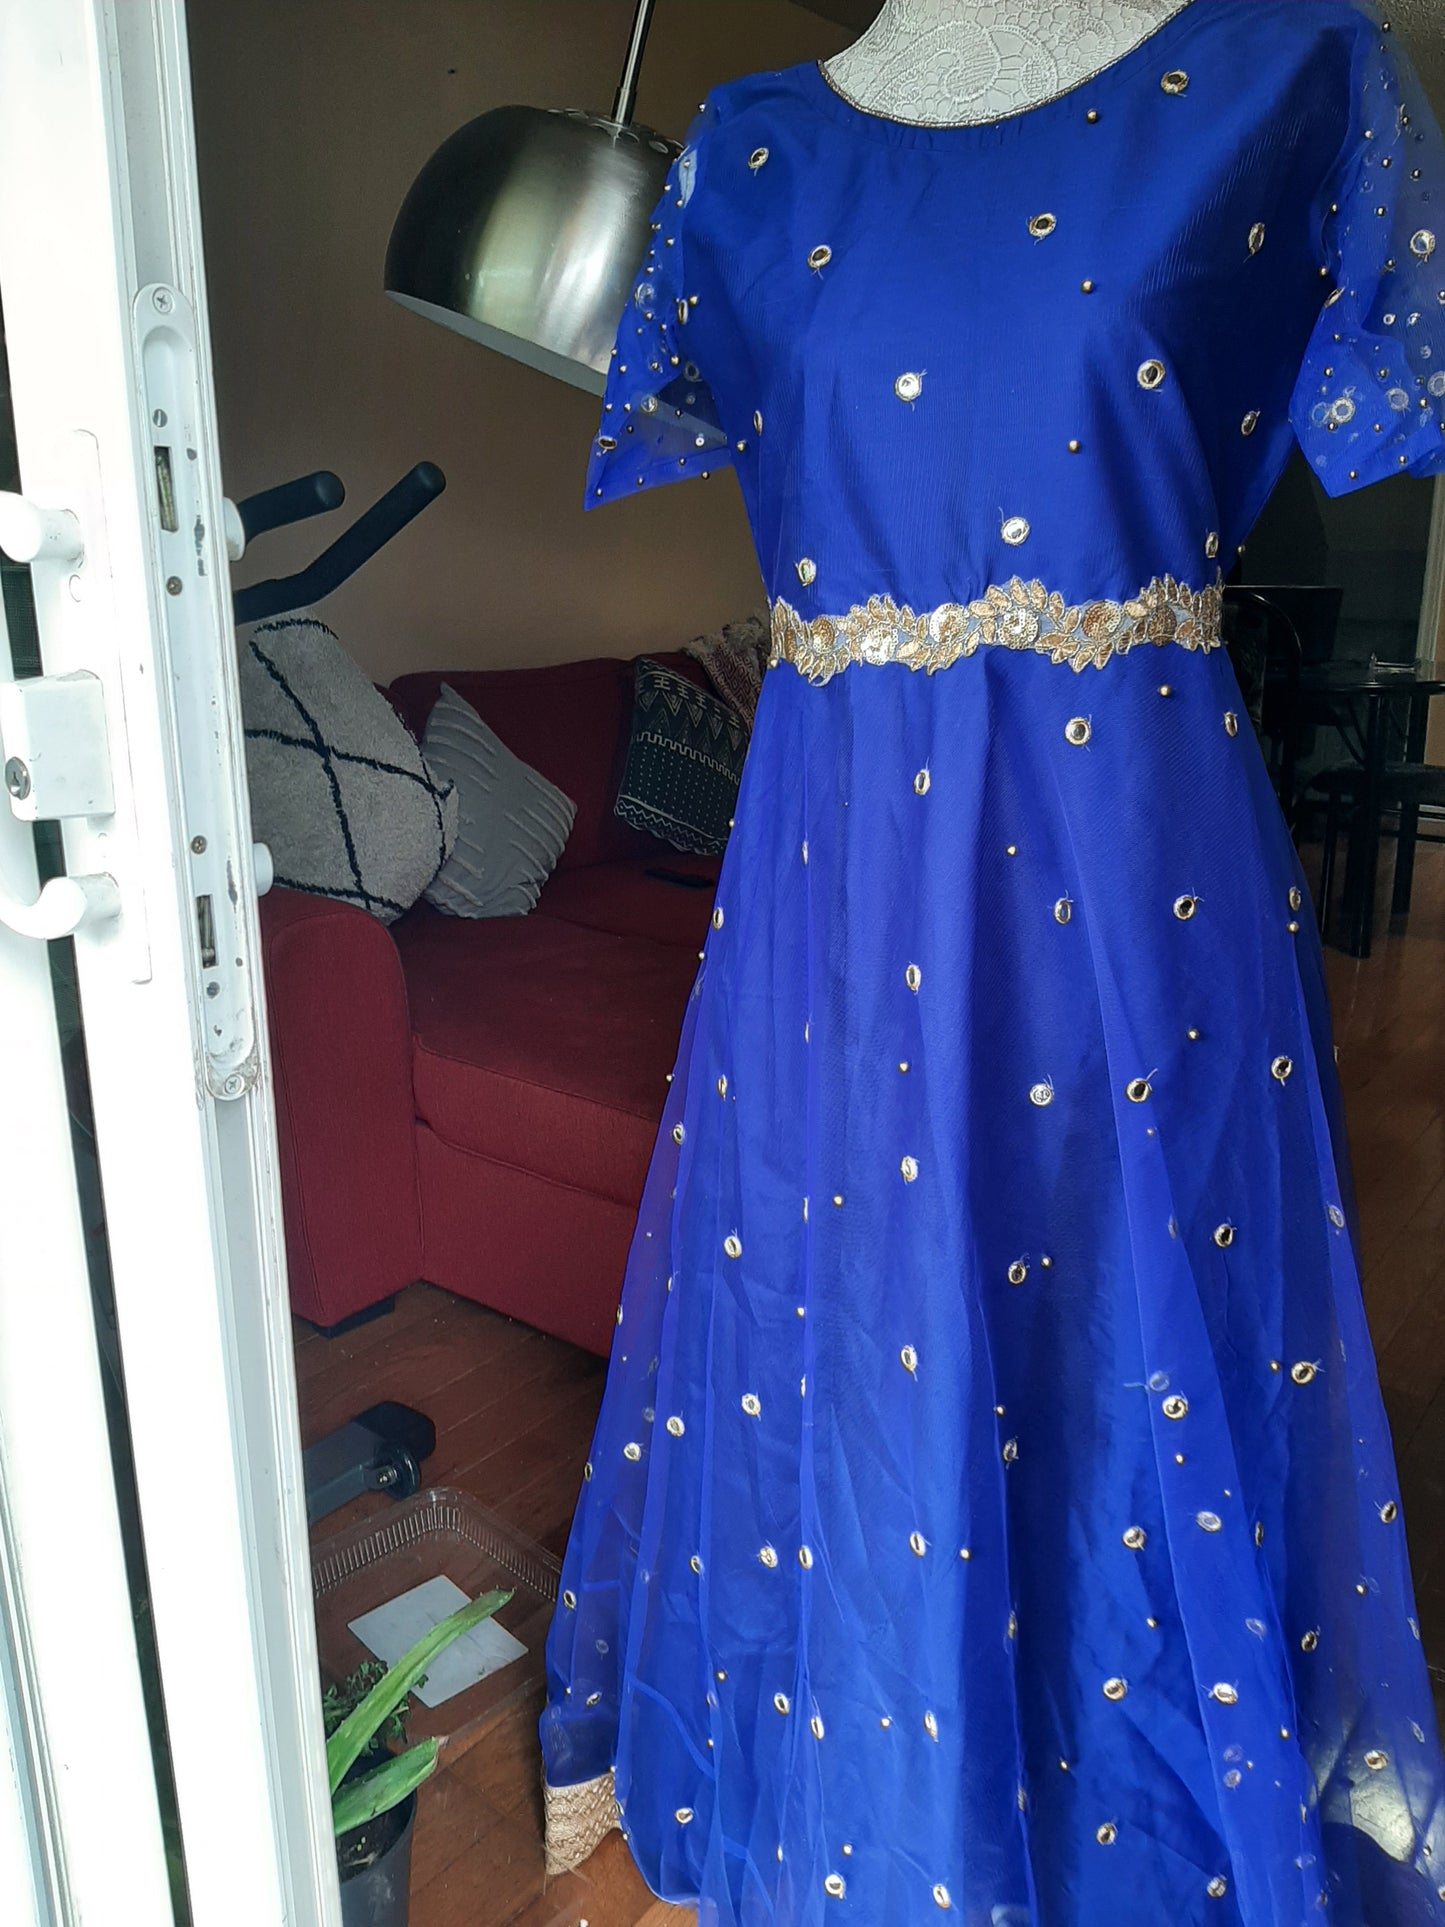 Blue Net Gown with Multi-colored Dupatta @ DressingStylesCA.com